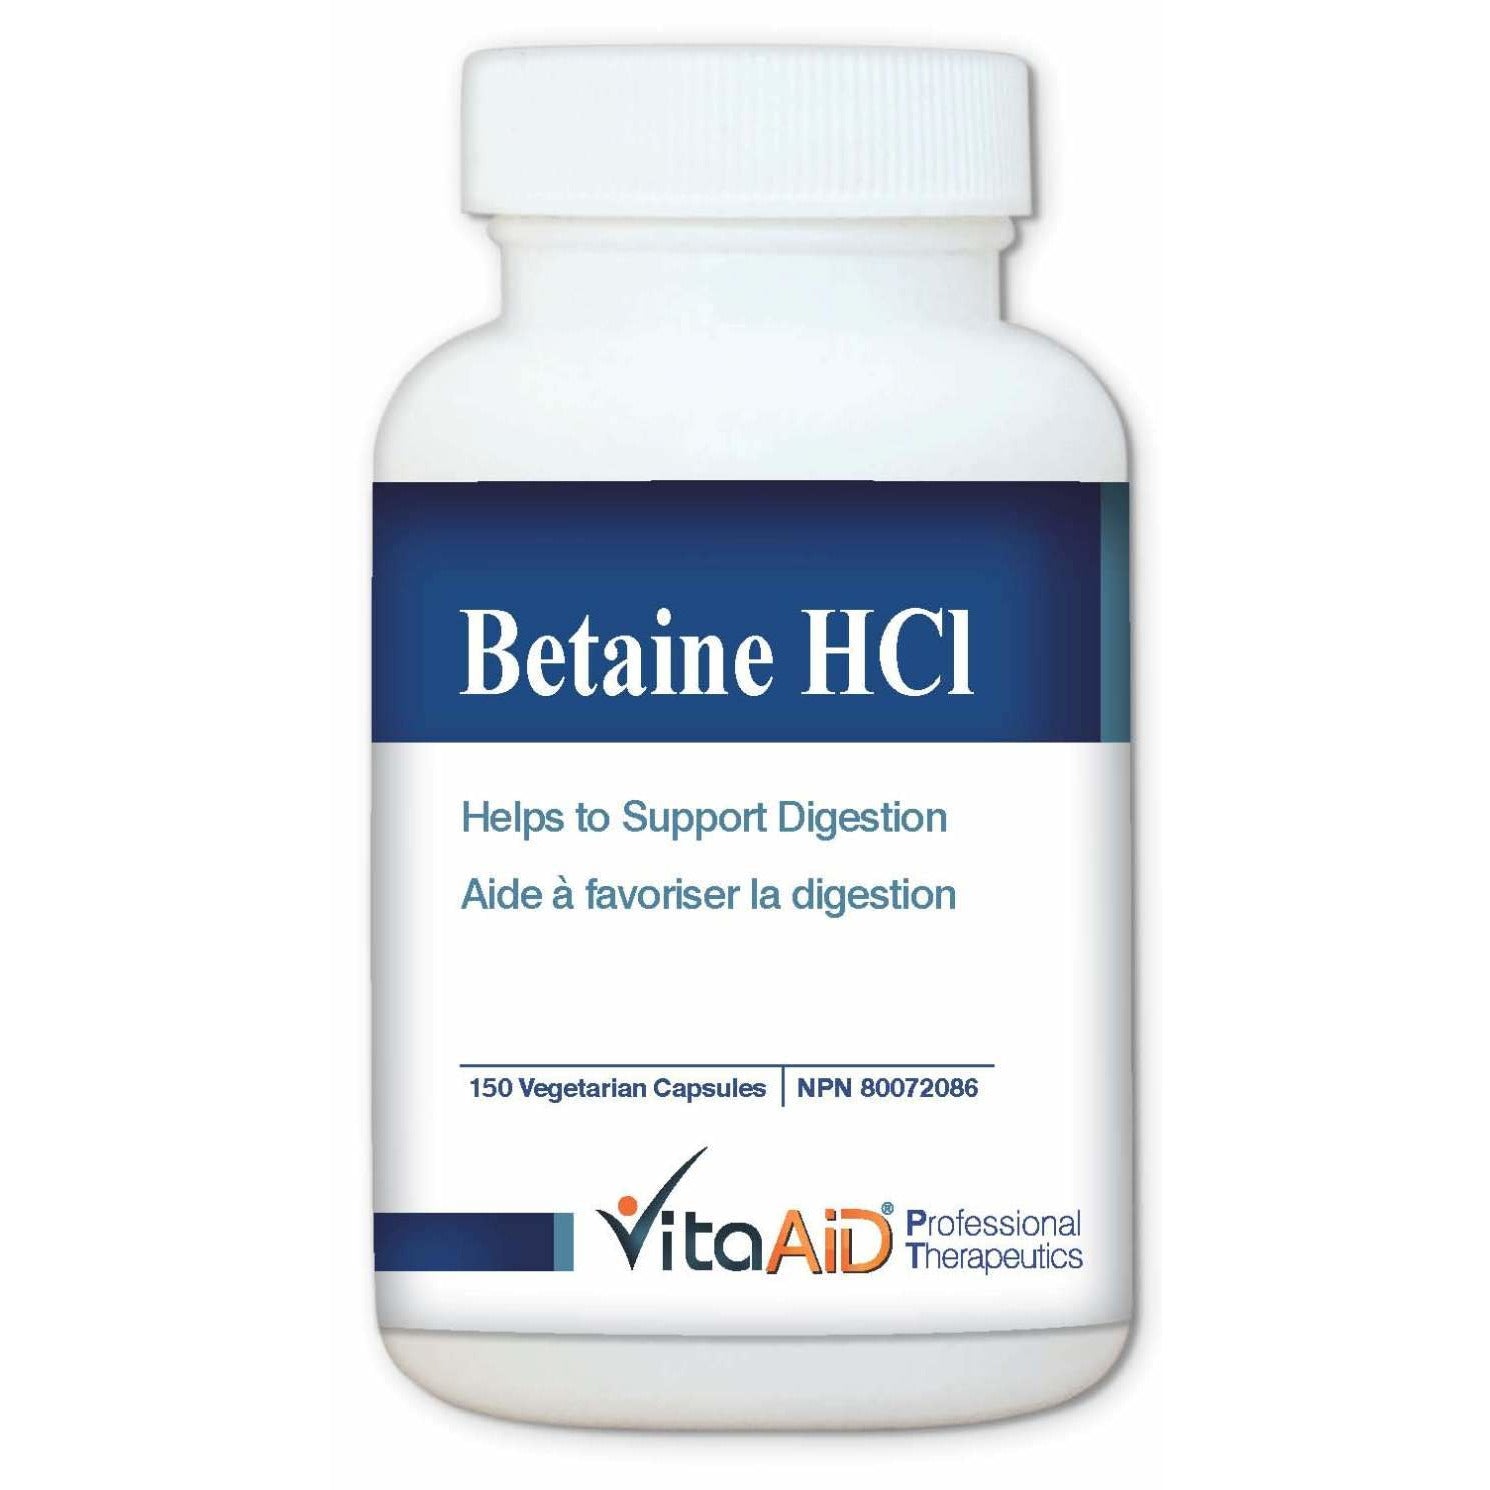 Betaine HCl Digestive Aid for Hypochlorhydria 150 veg caps